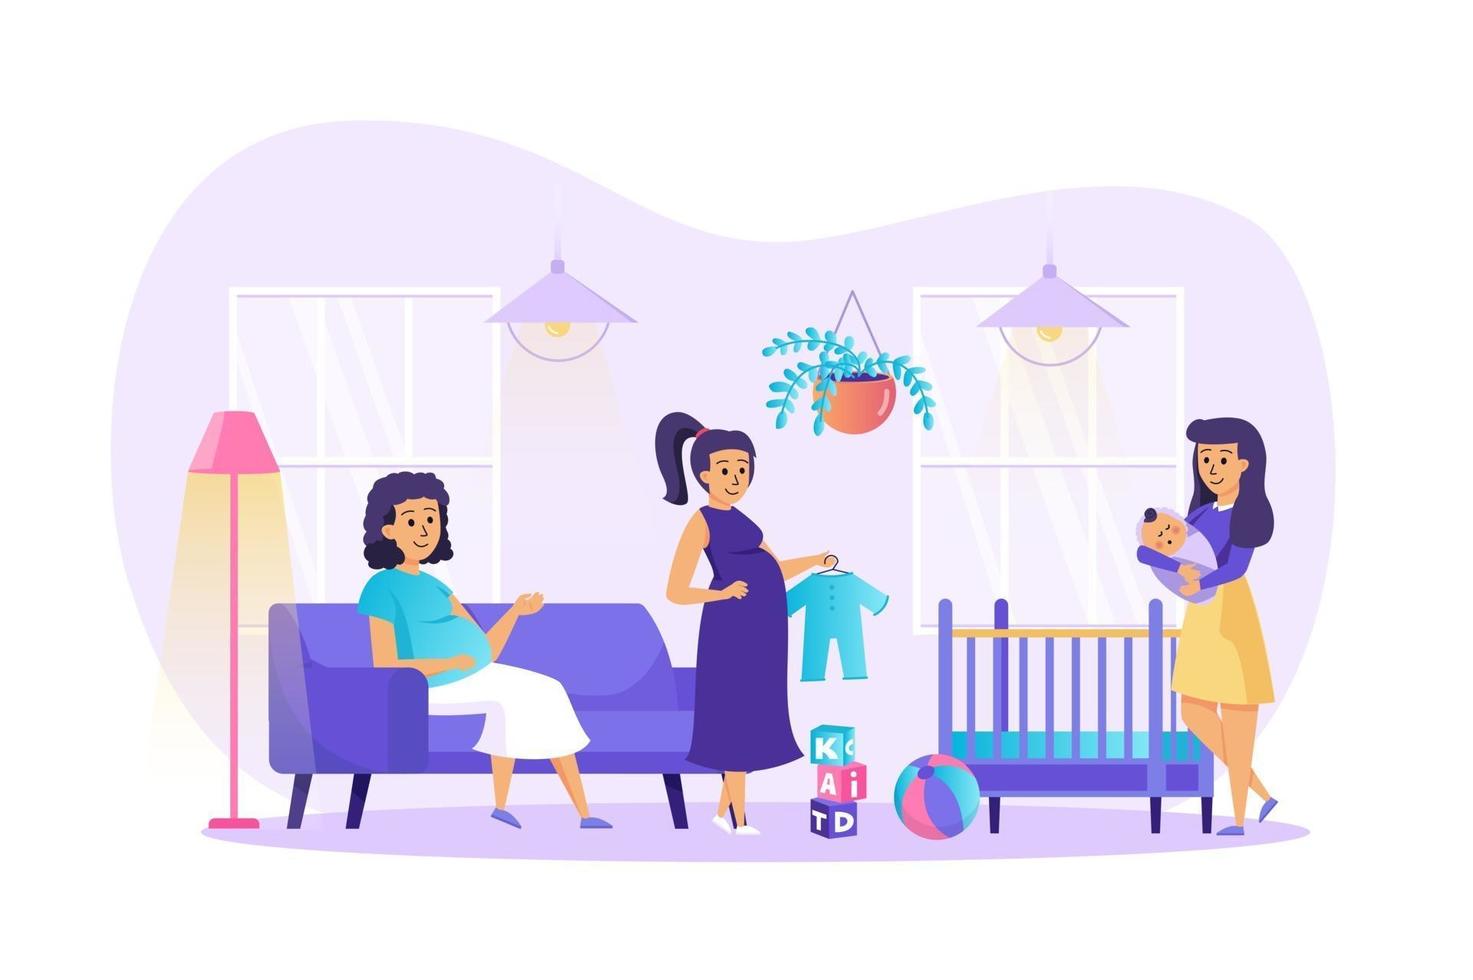 Pregnancy and motherhood concept vector illustration of people characters in flat design